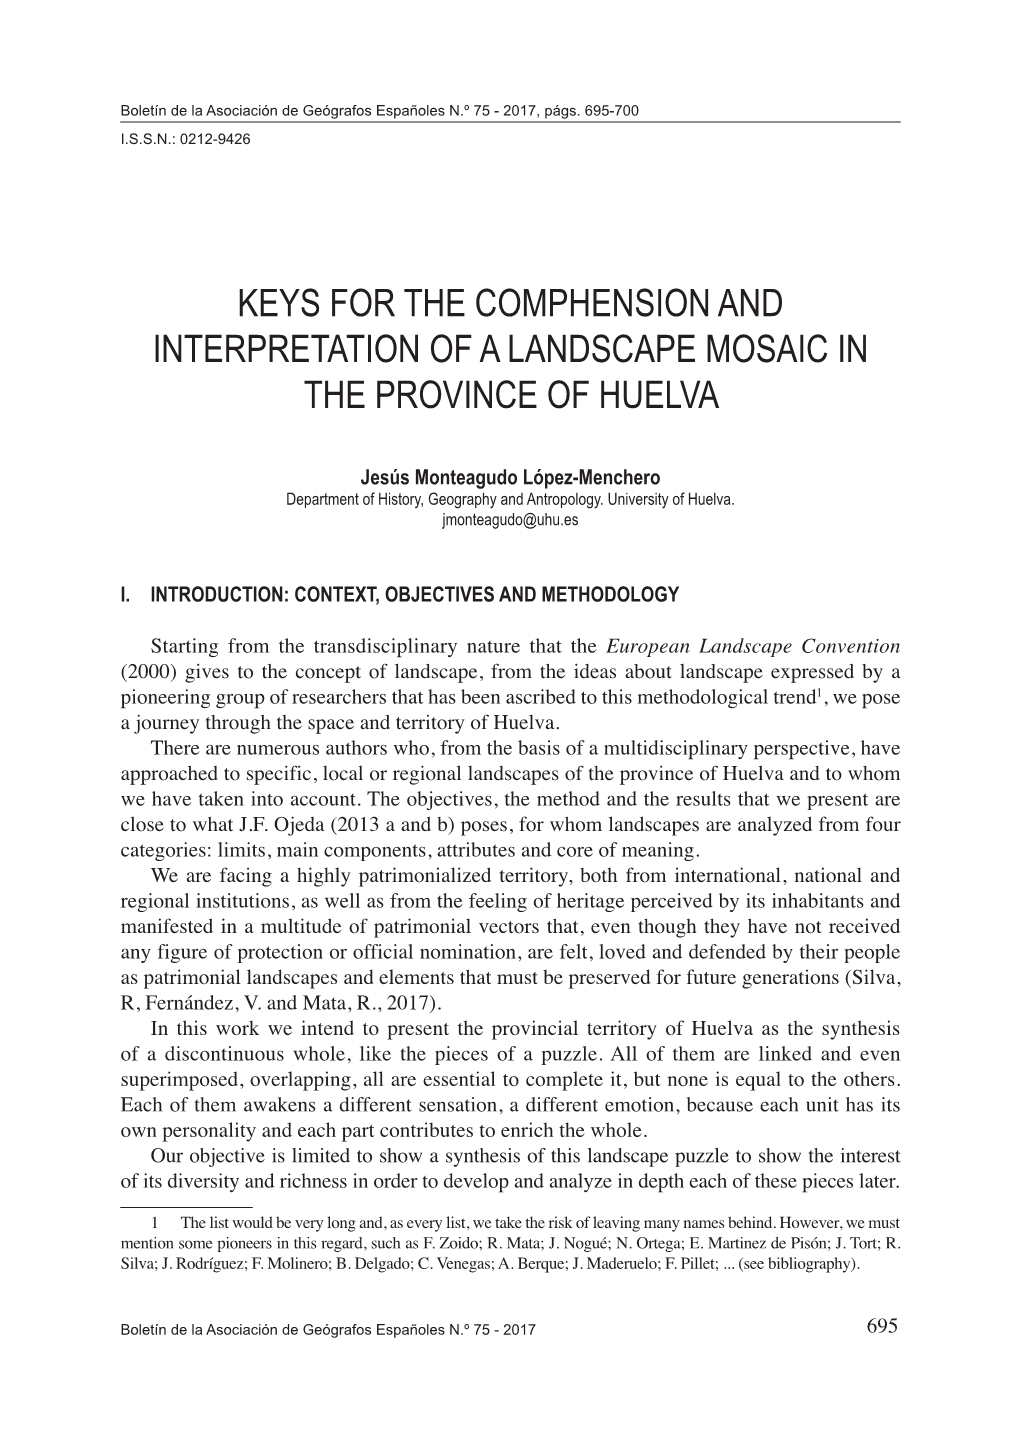 Keys for the Comphension and Interpretation of a Landscape Mosaic in the Province of Huelva